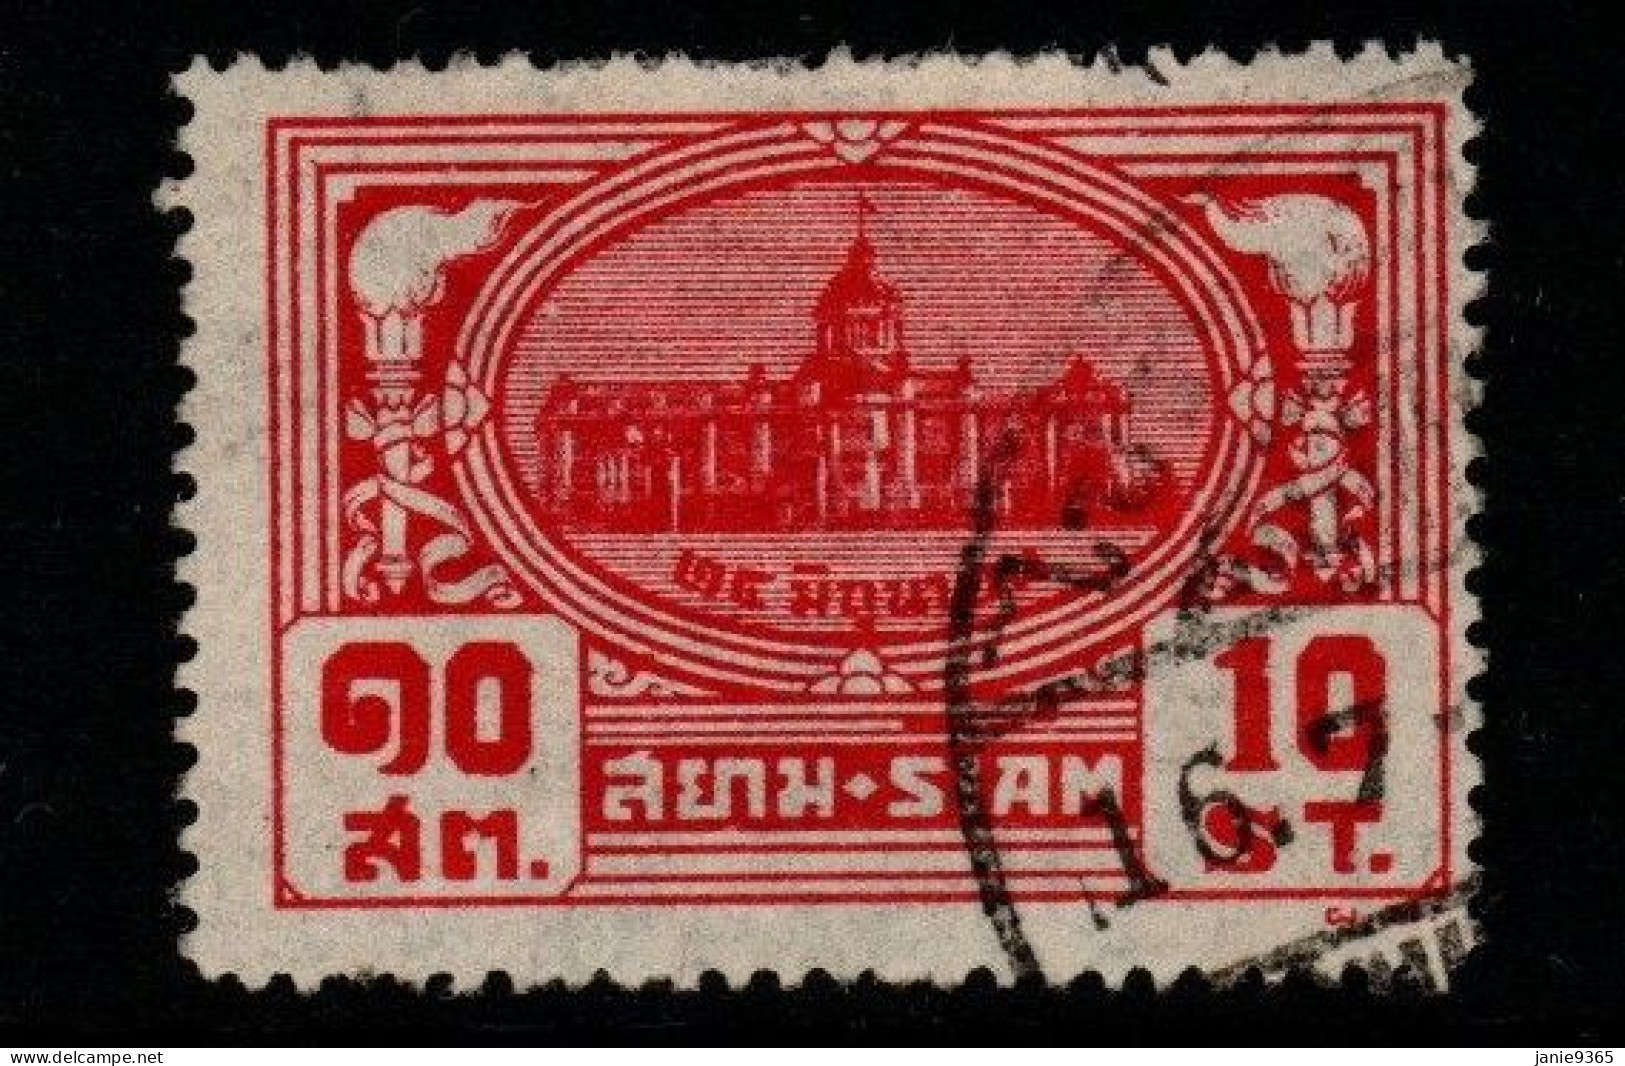 Thailand Cat 283 1939 7th Anniversary Of Constitution ,10 Sat Red ,used - Thailand